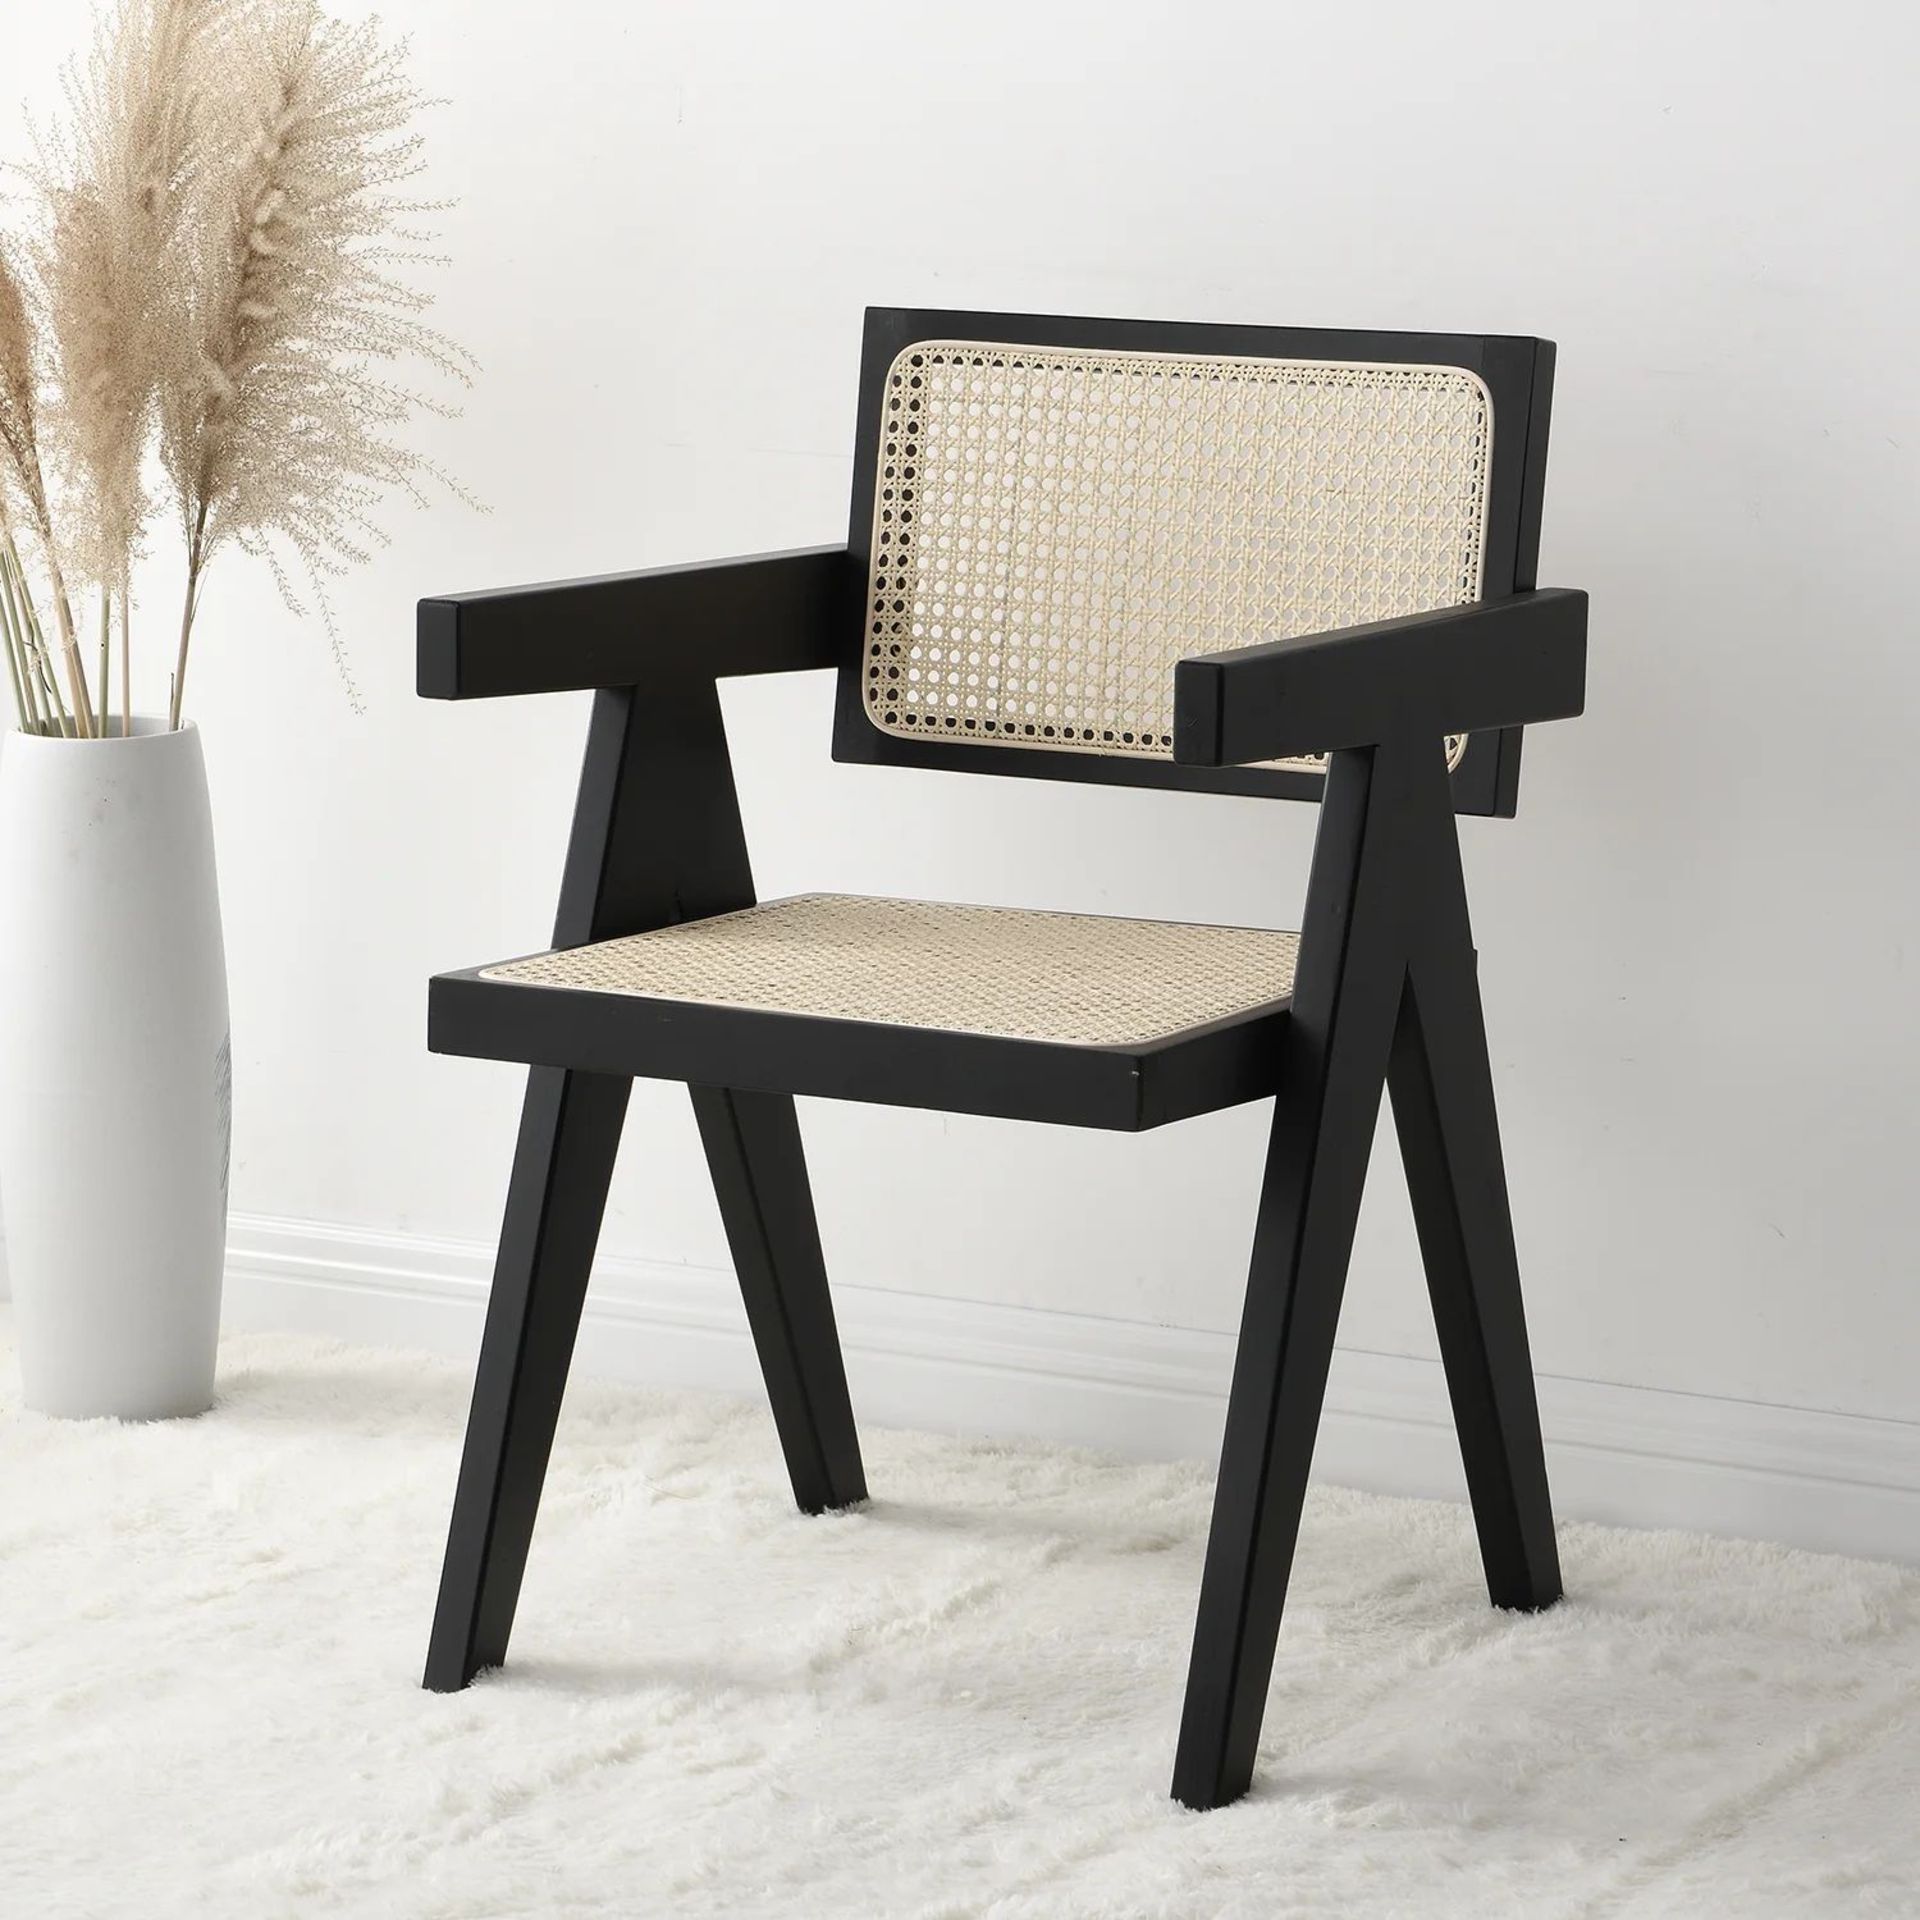 Jeanne Black Colour Cane Rattan Solid Beech Wood Dining Chair. - R19.2. RRP £219.99. The cane rattan